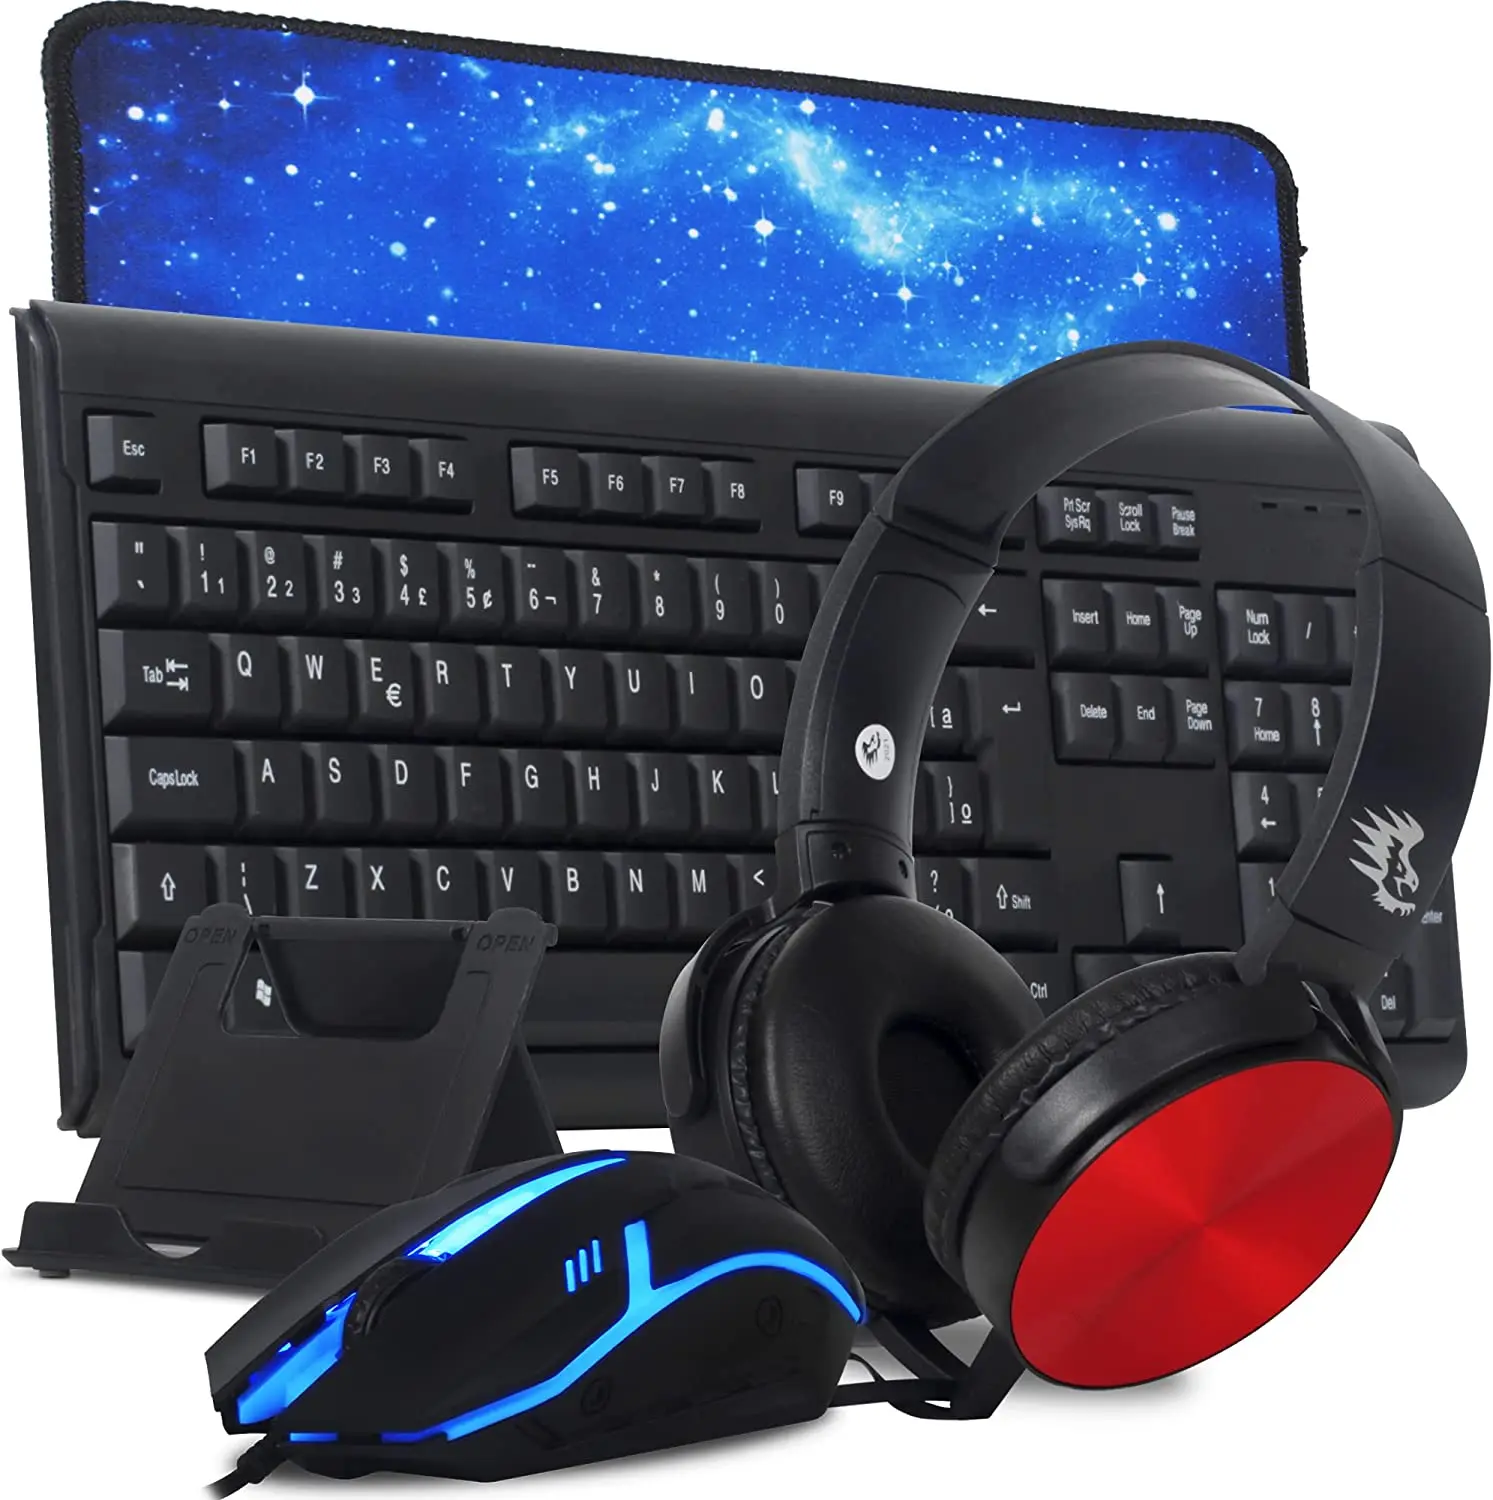 

Fantastic RGB USB Gamer Headset Kit with Mouse, Mouse Pad, P2 Suporte Mesa and Mobile Stand-up for PC, PS4, PS5, Xbox S Series &